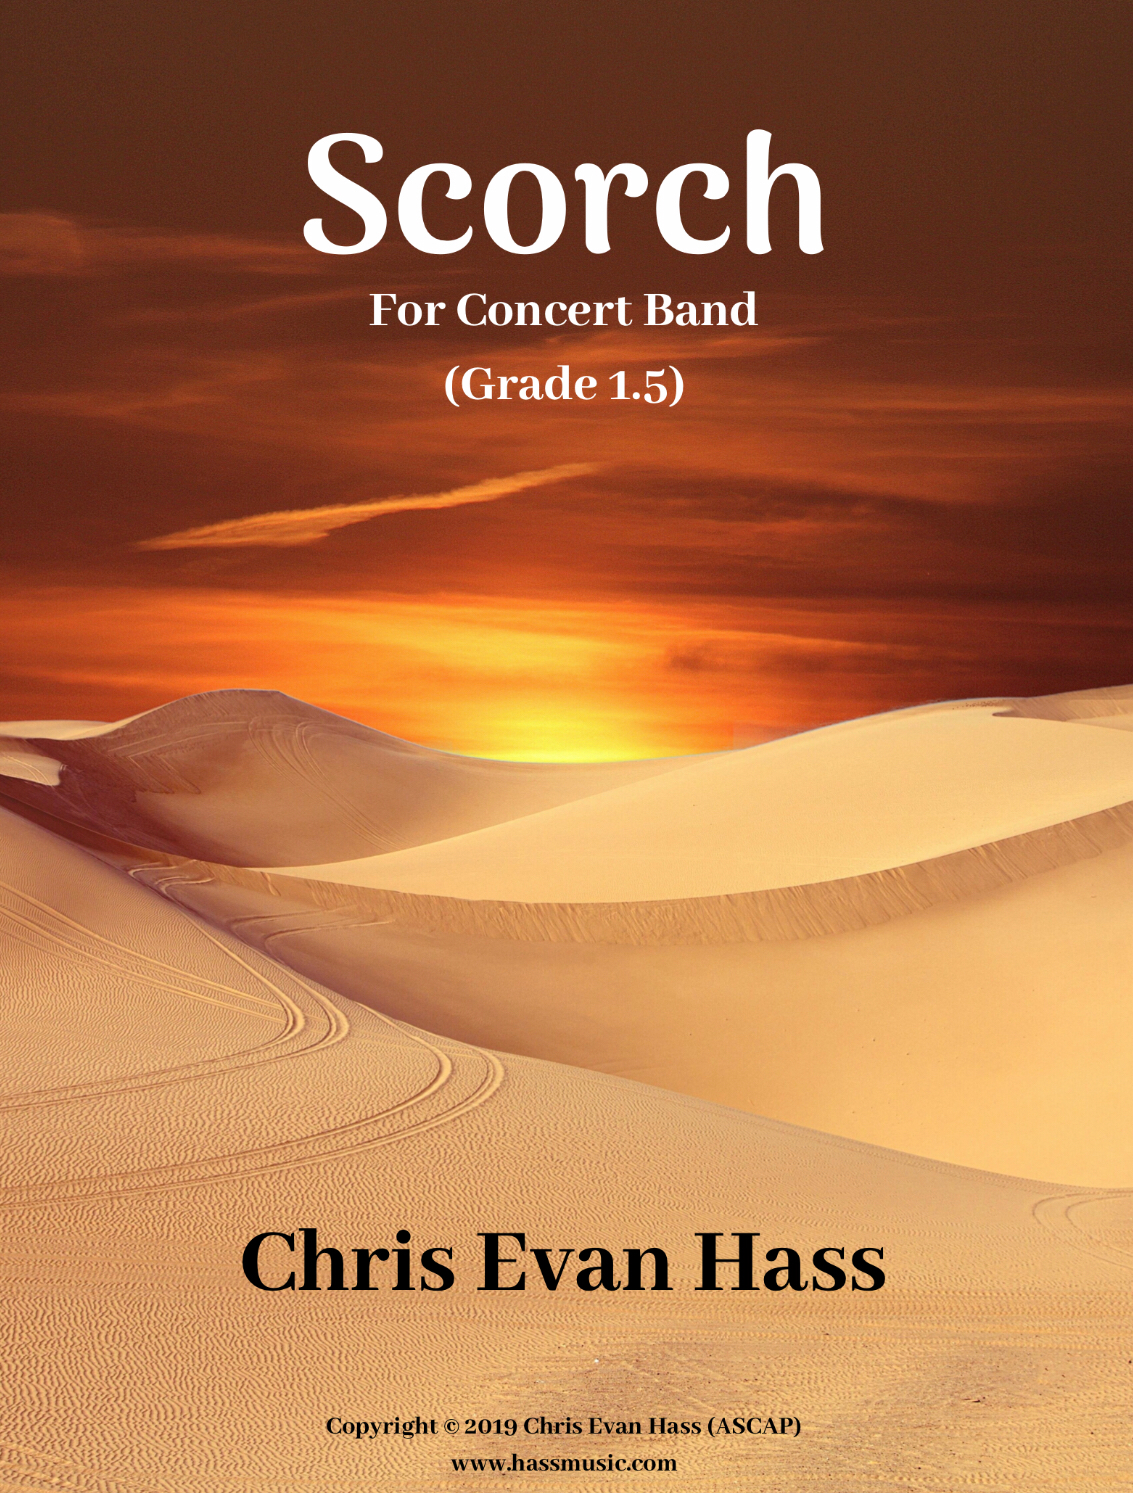 Scorch by Chris Evan Hass